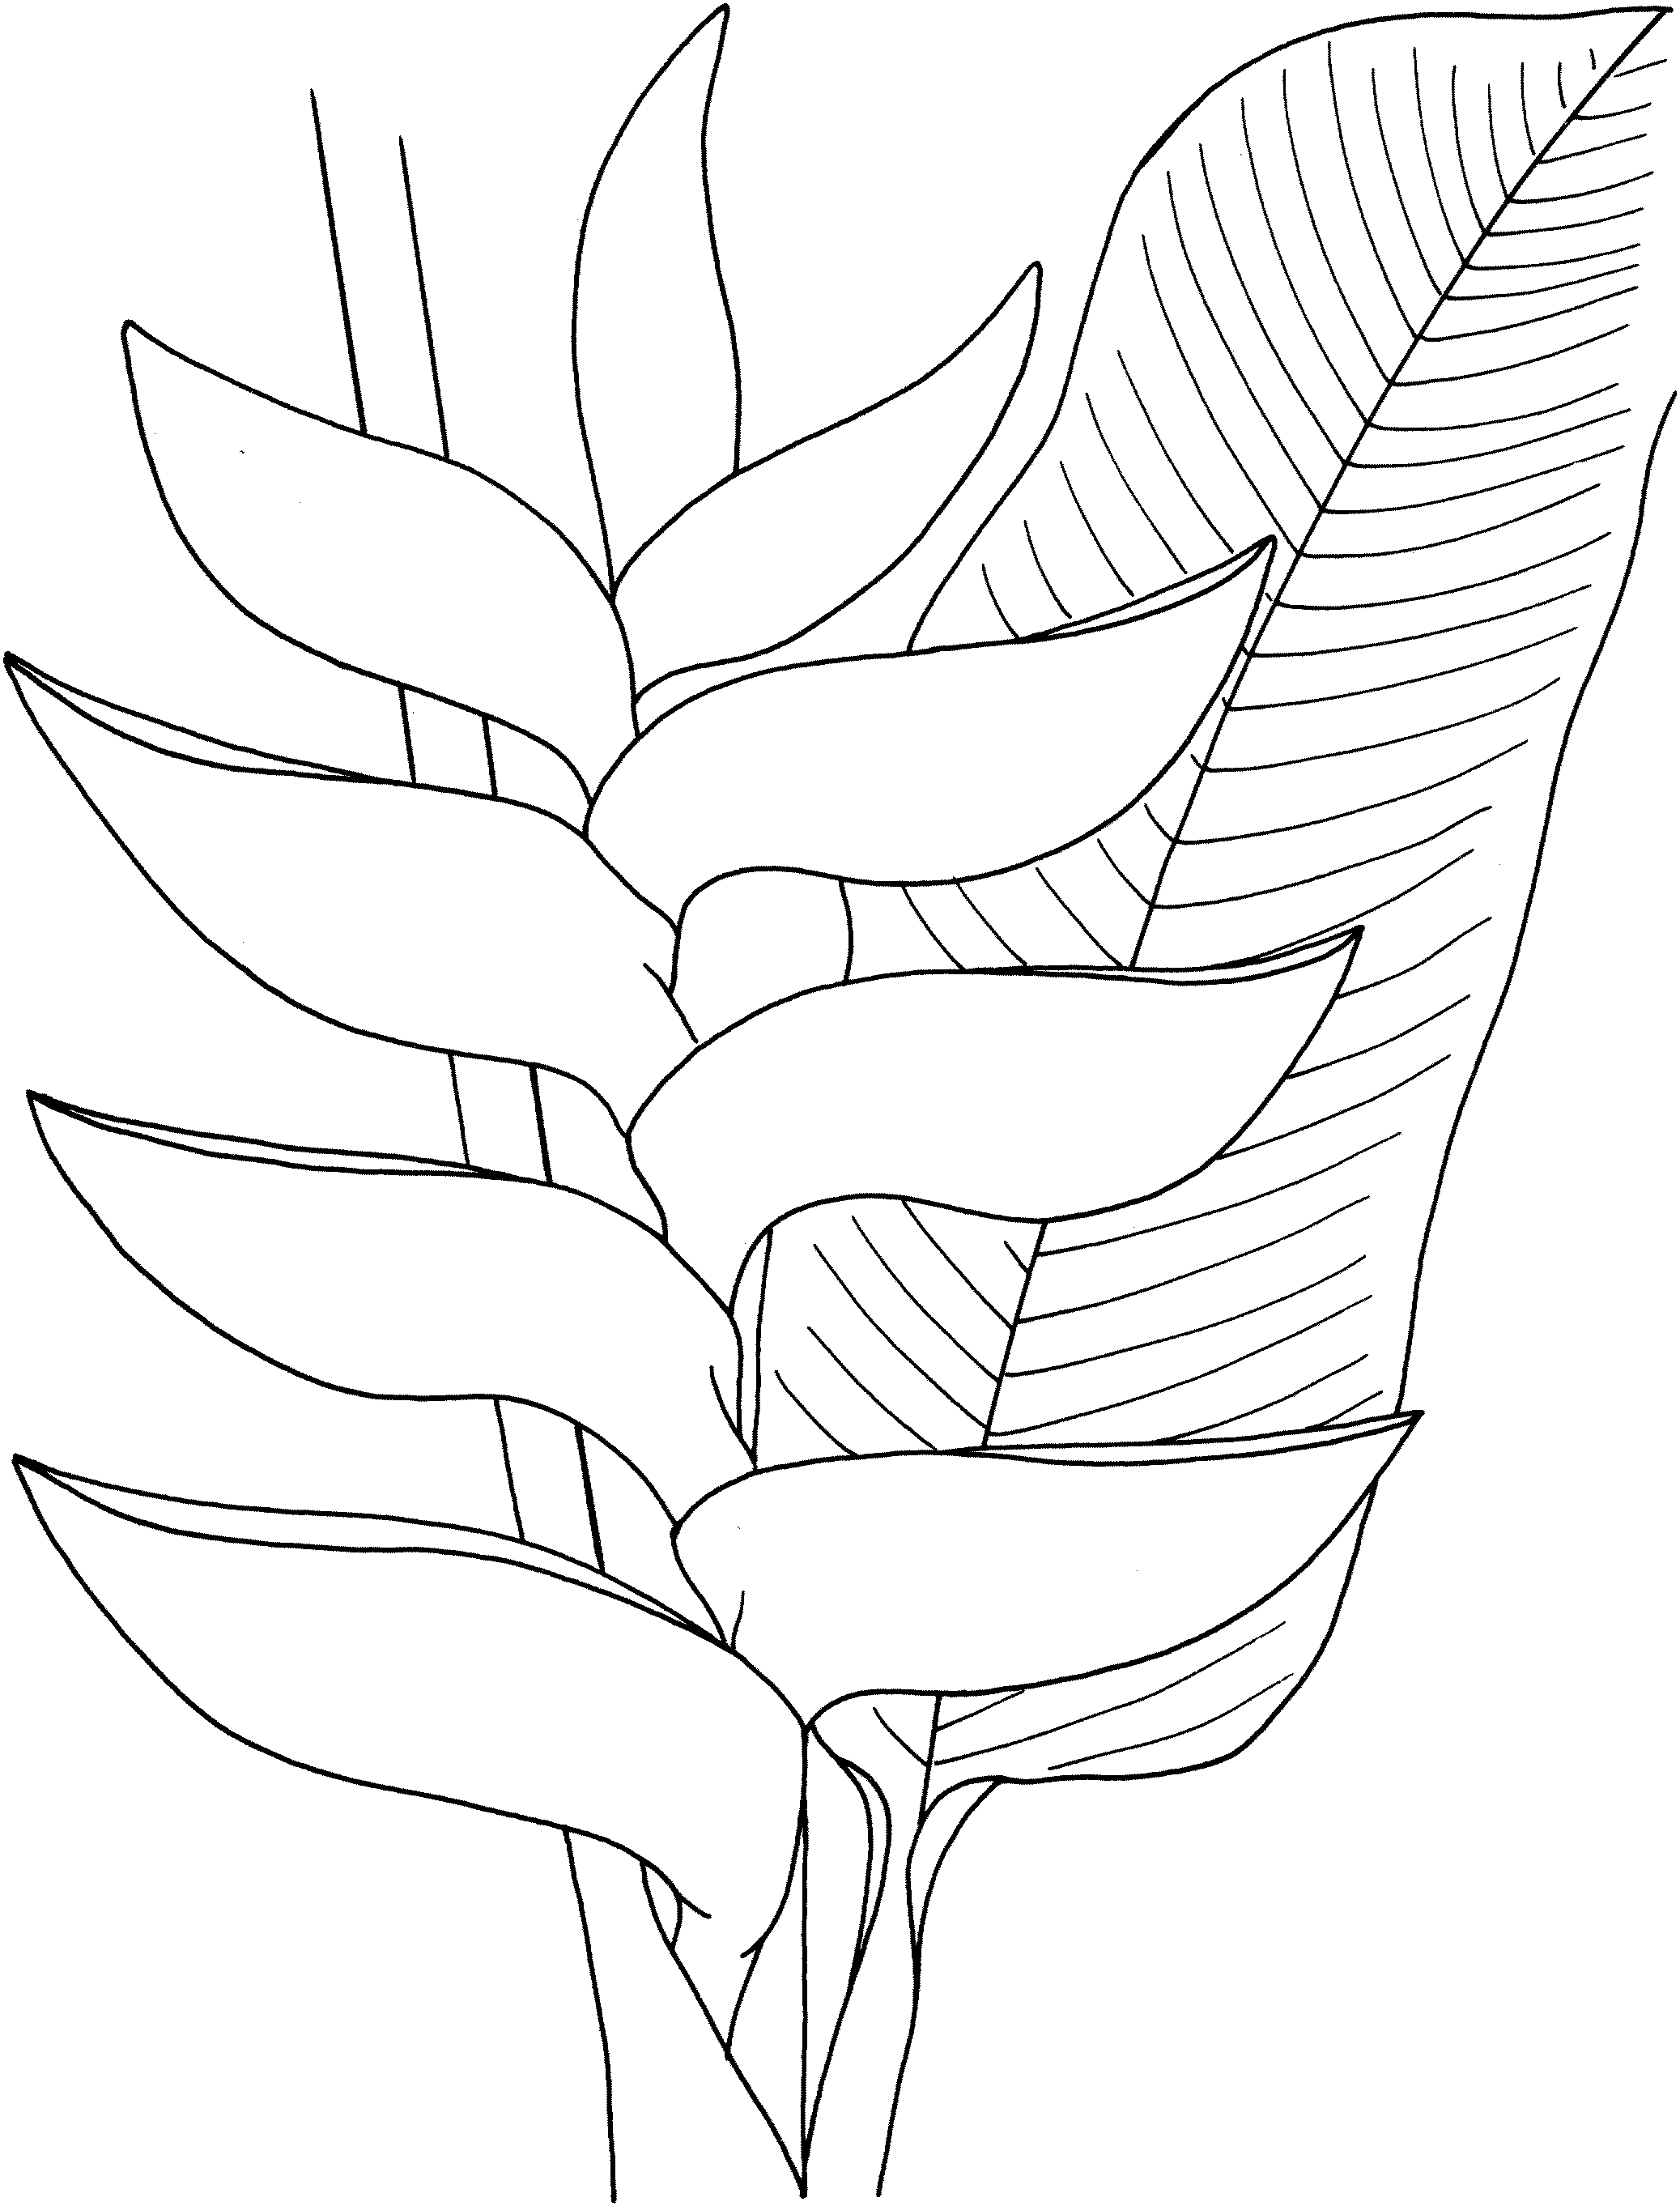 Heliconia flowers coloring pages